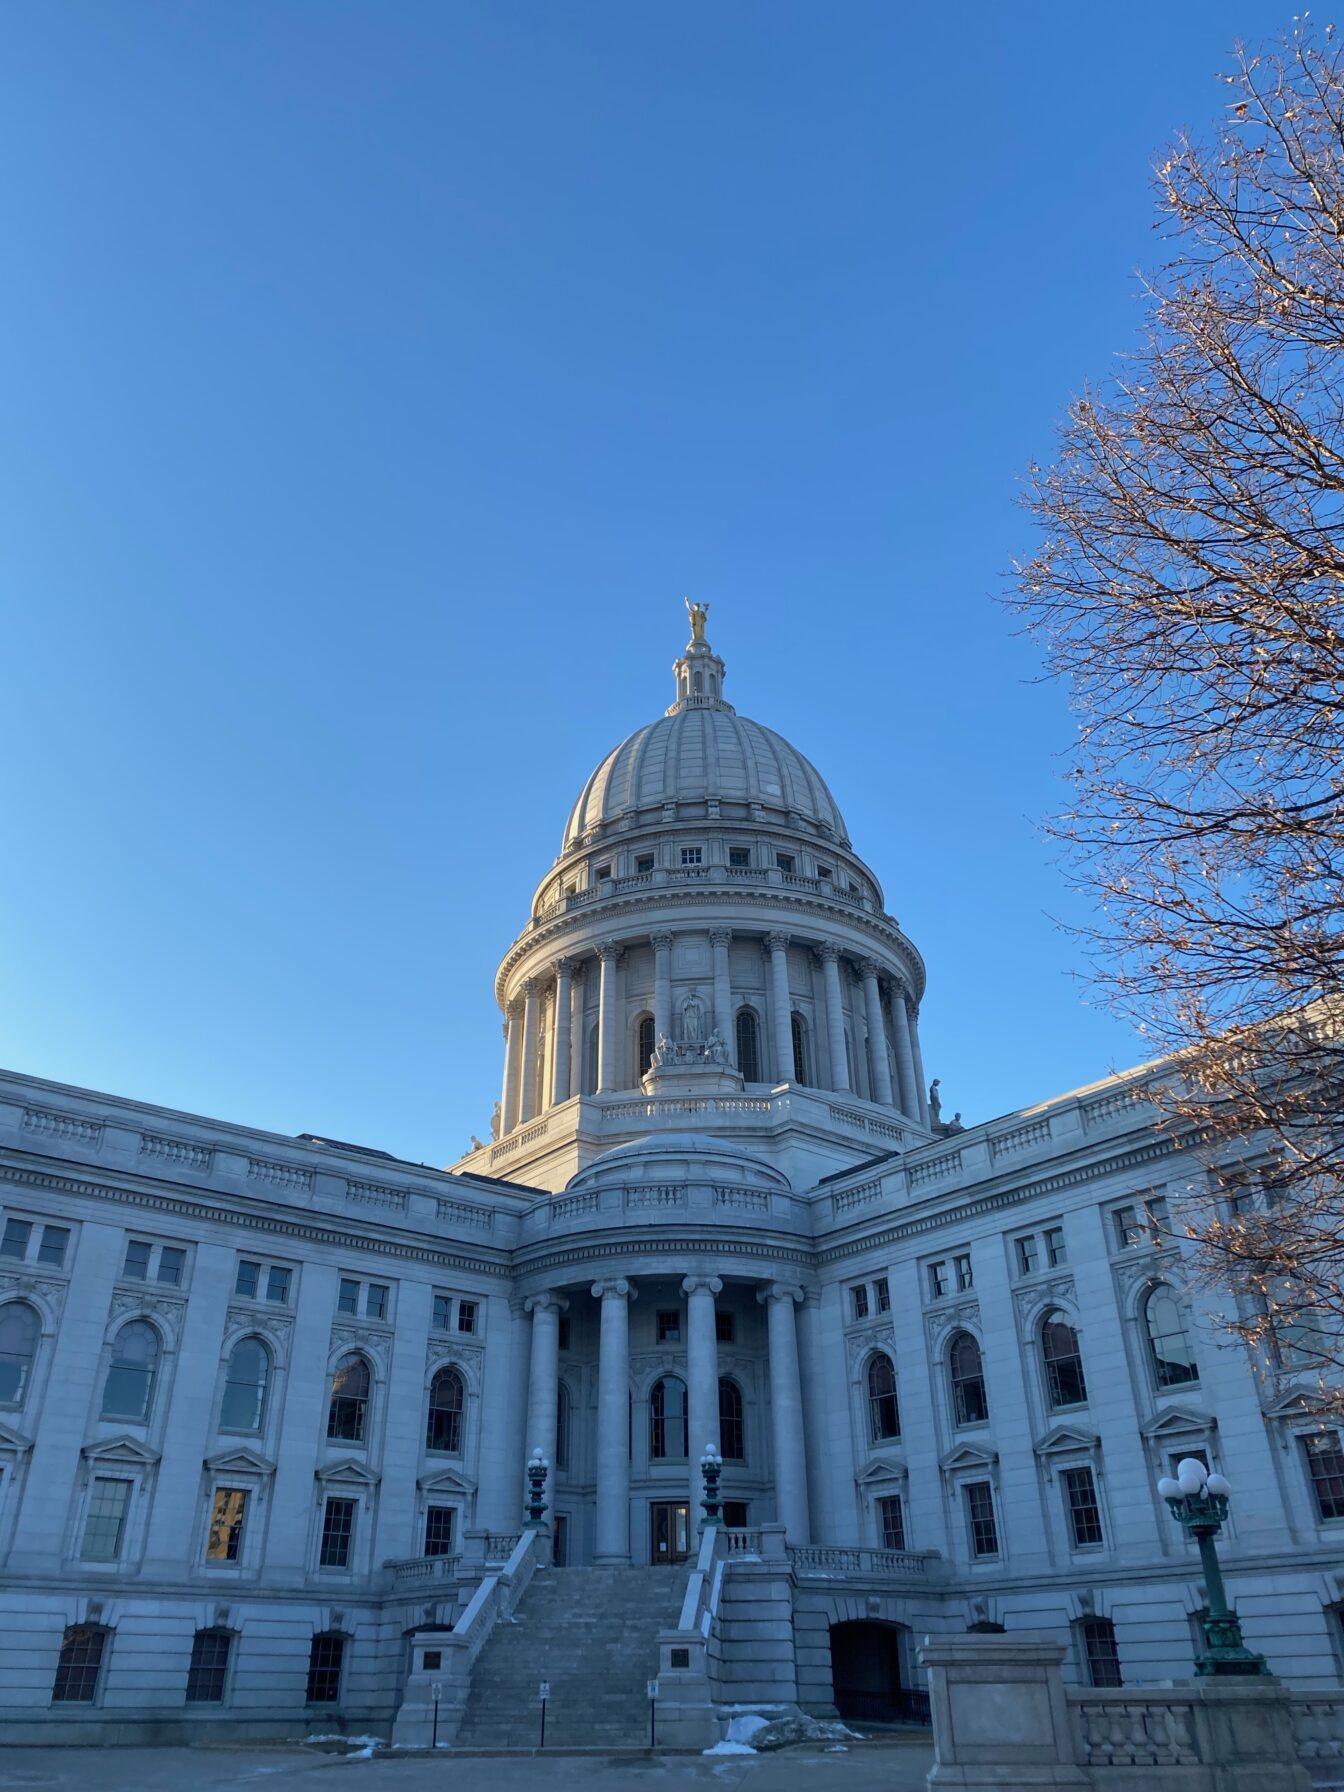 Governor Evers, Republican leaders reach tentative agreement on shared revenue plan